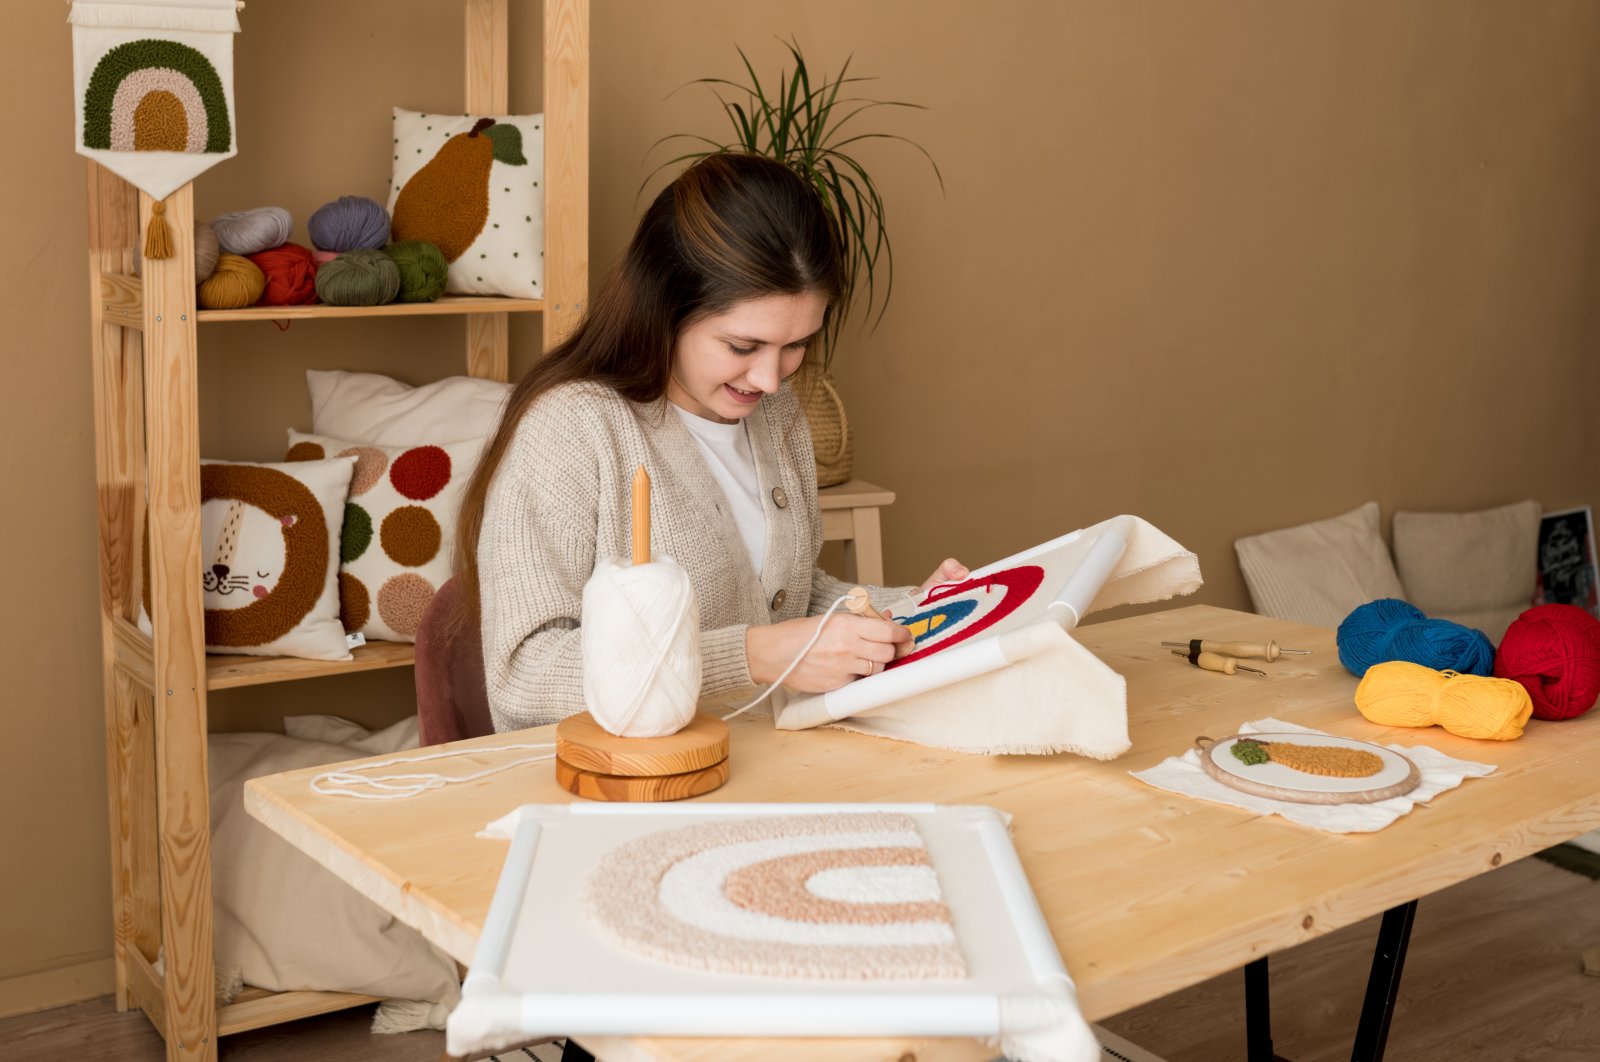 İSMEK offers handcraft courses such as jewelry making, woodworking, crocheting and more. (Shutterstock Photo)